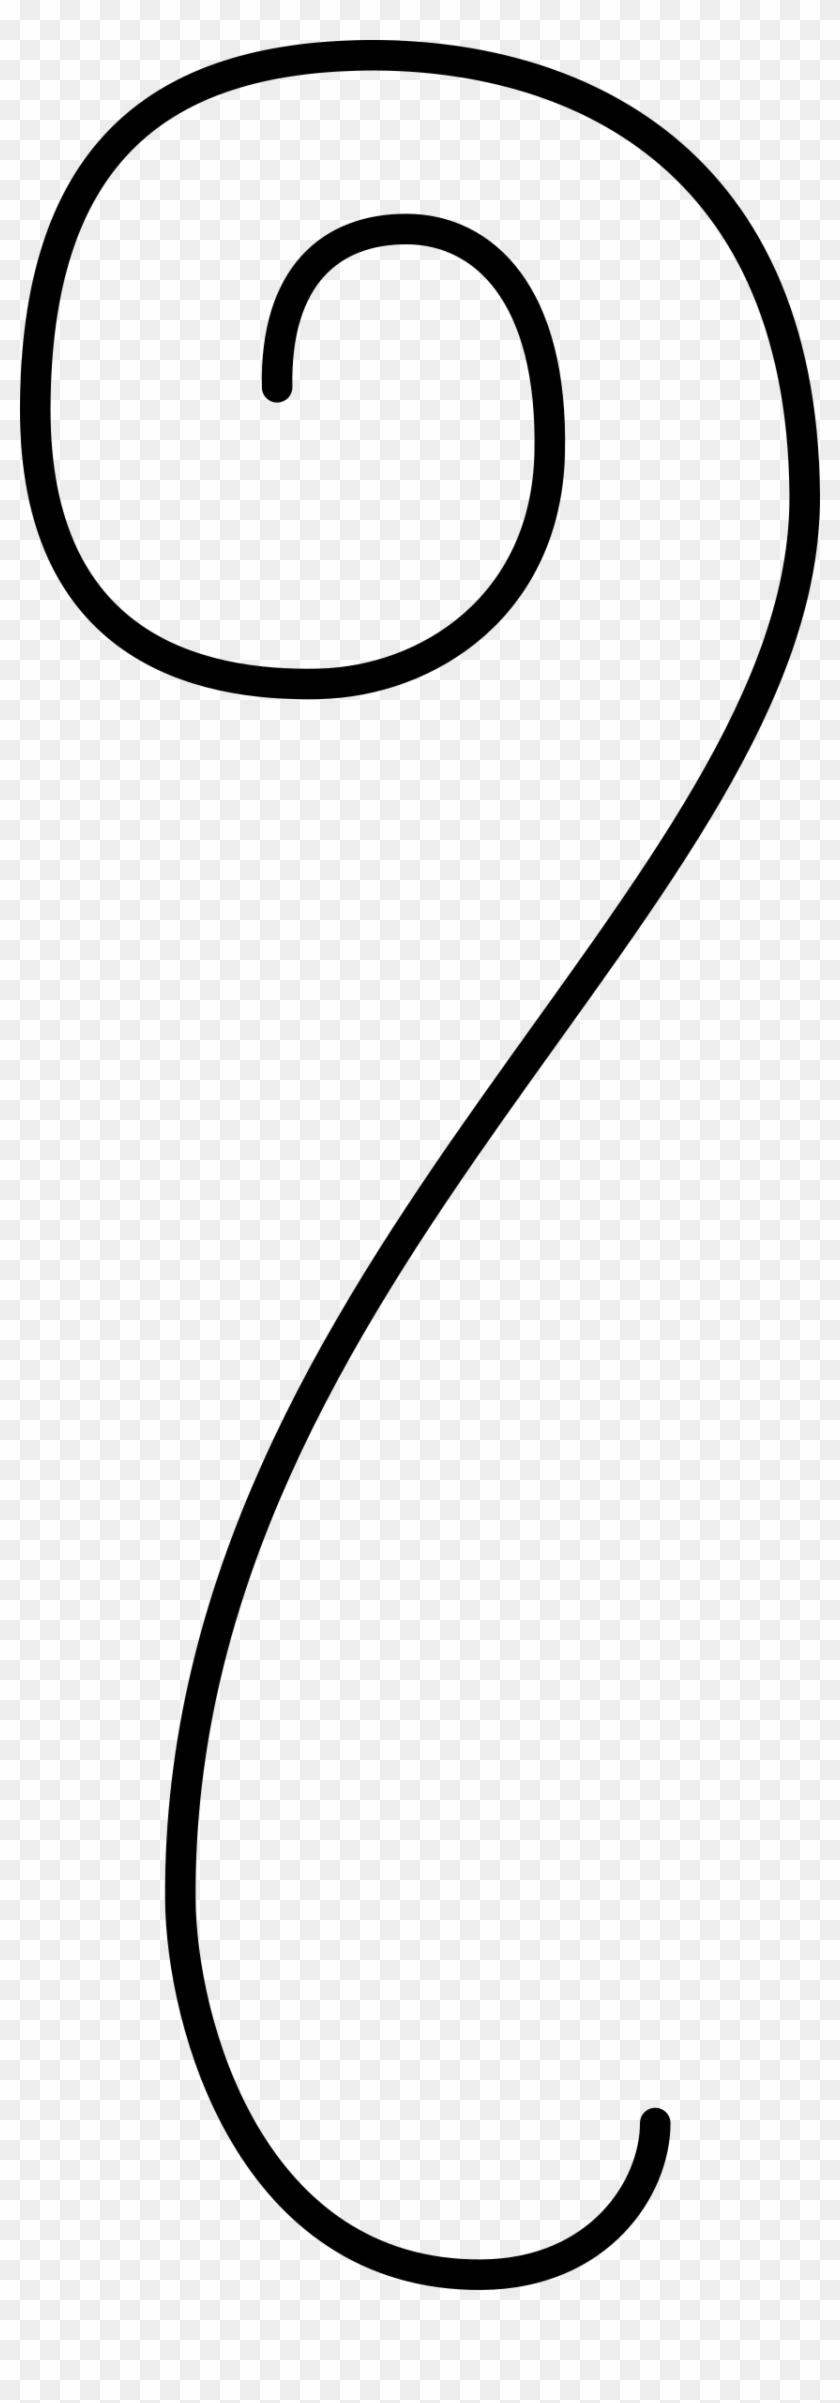 Line Clipart Squiggly - Vertical Line Clipart Png #1613425